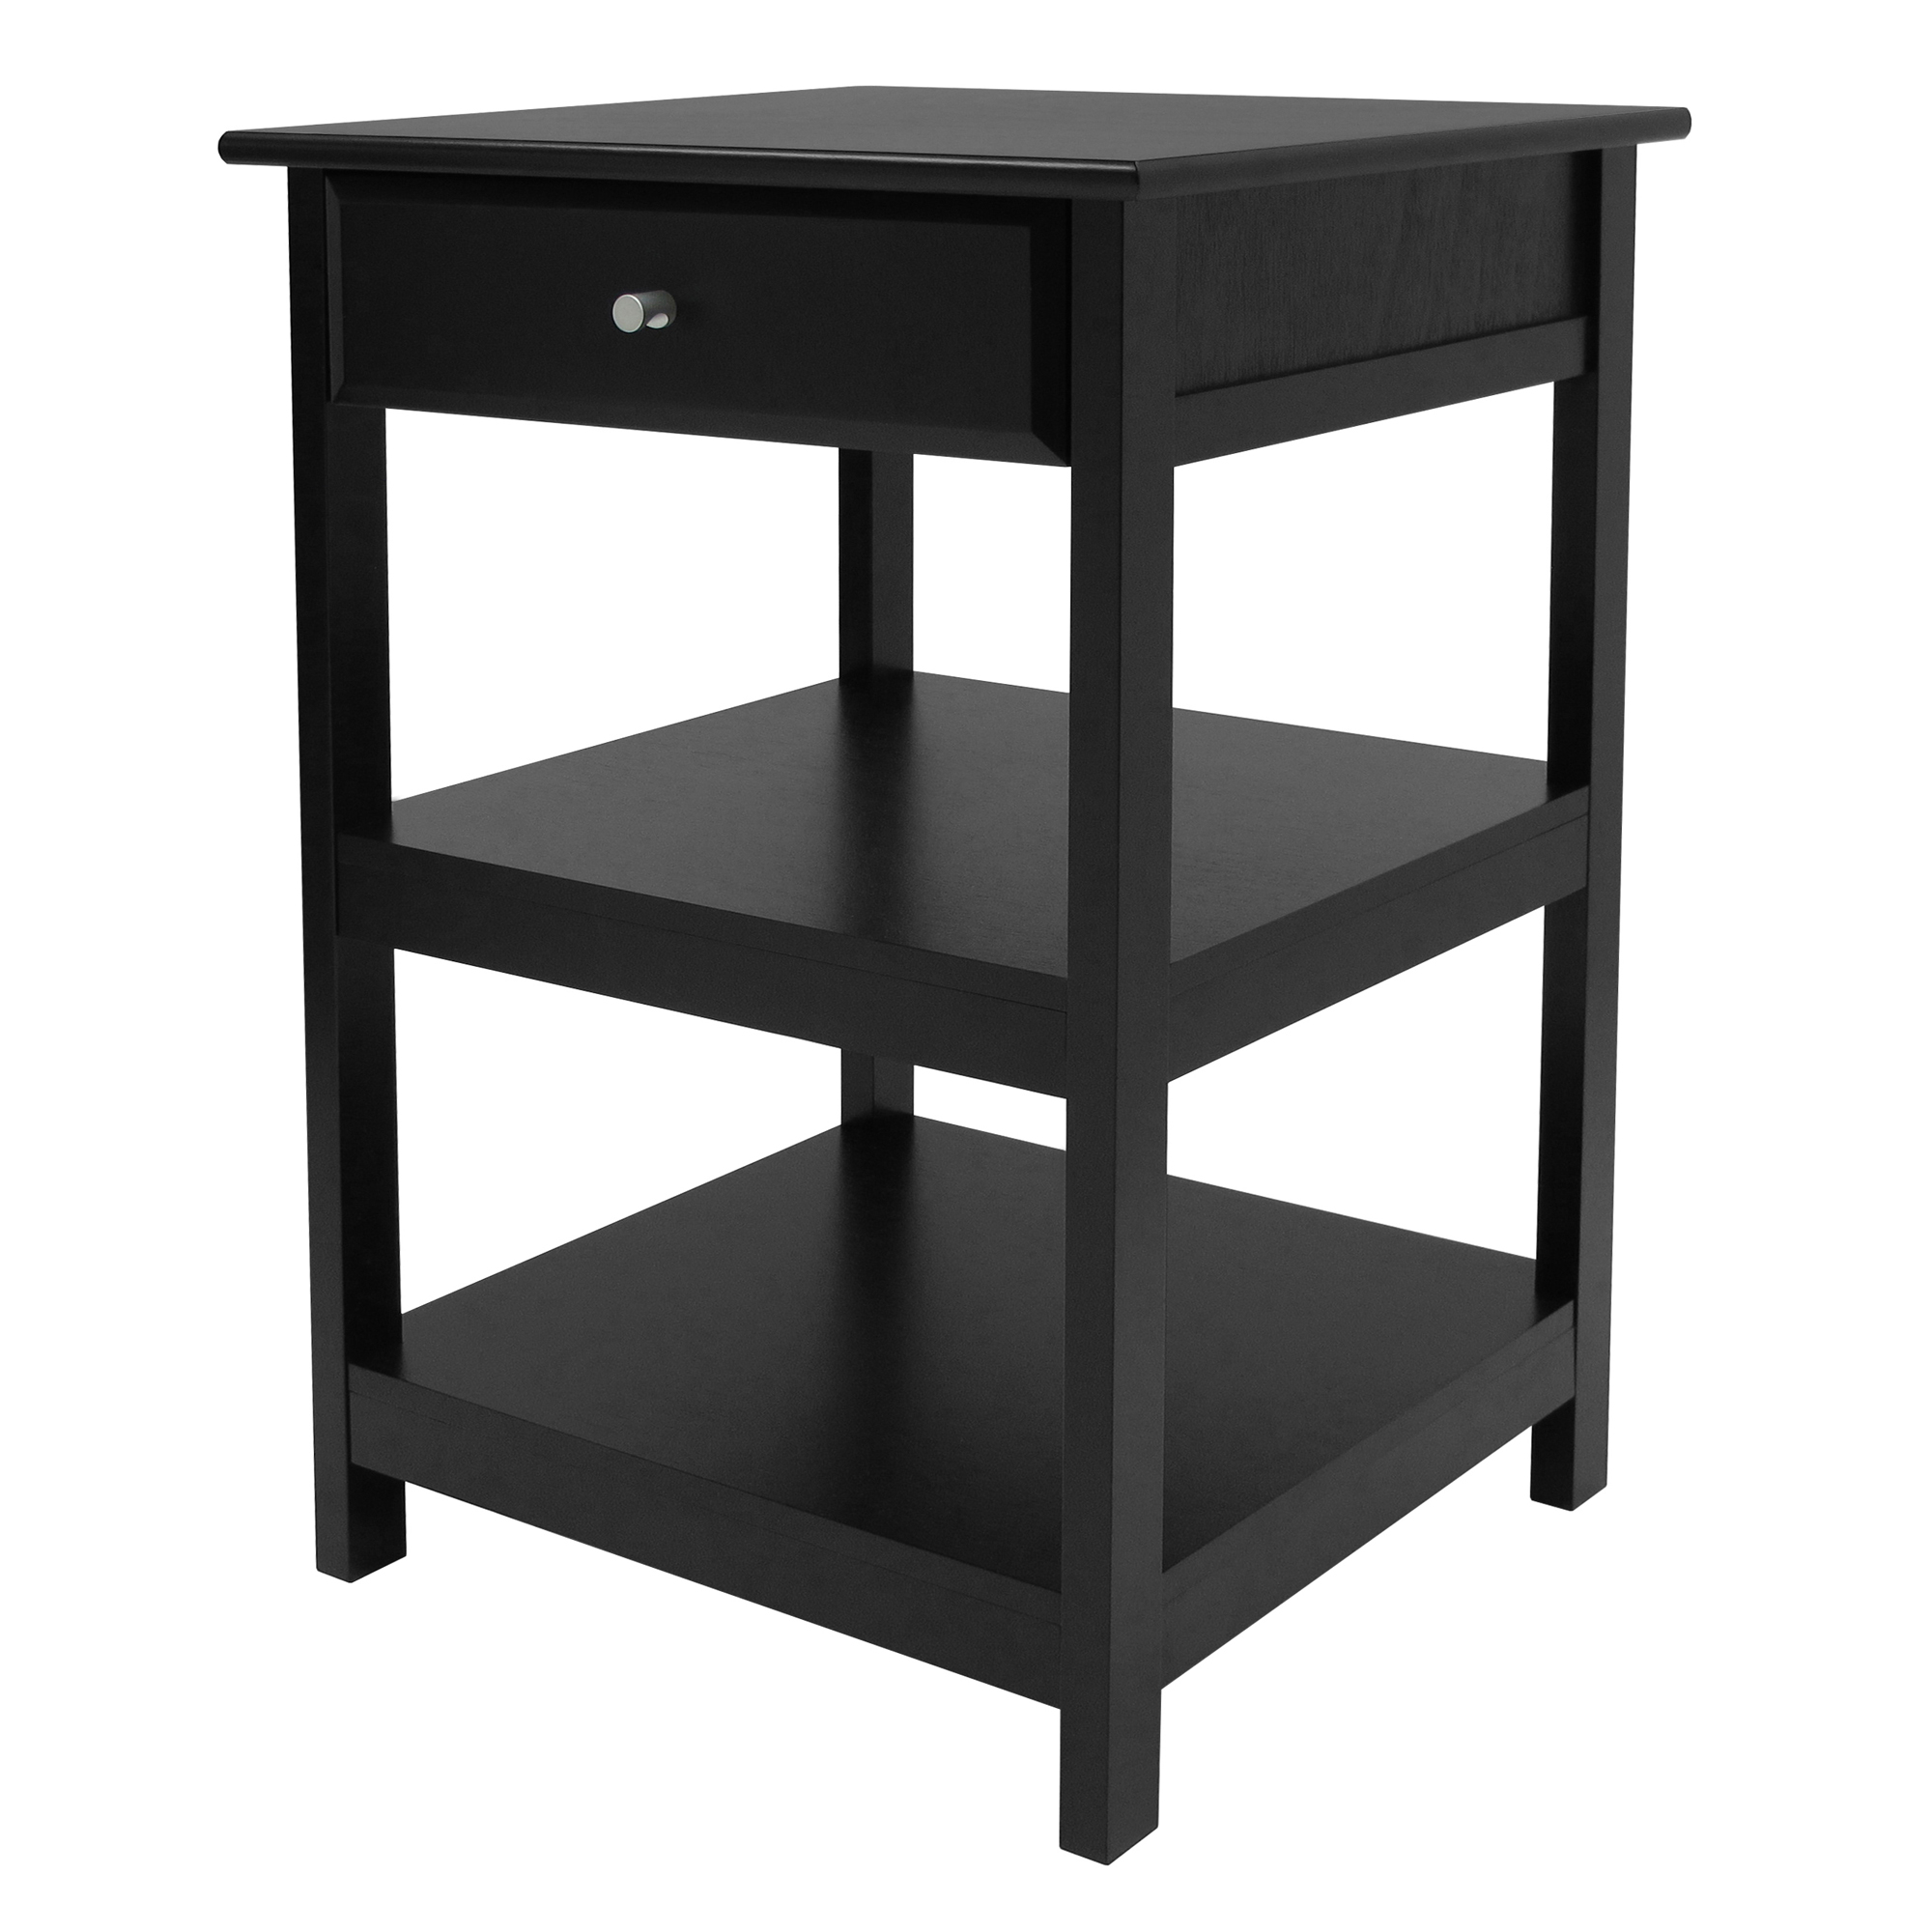 Delta Home Office Printer Stand - image 1 of 3